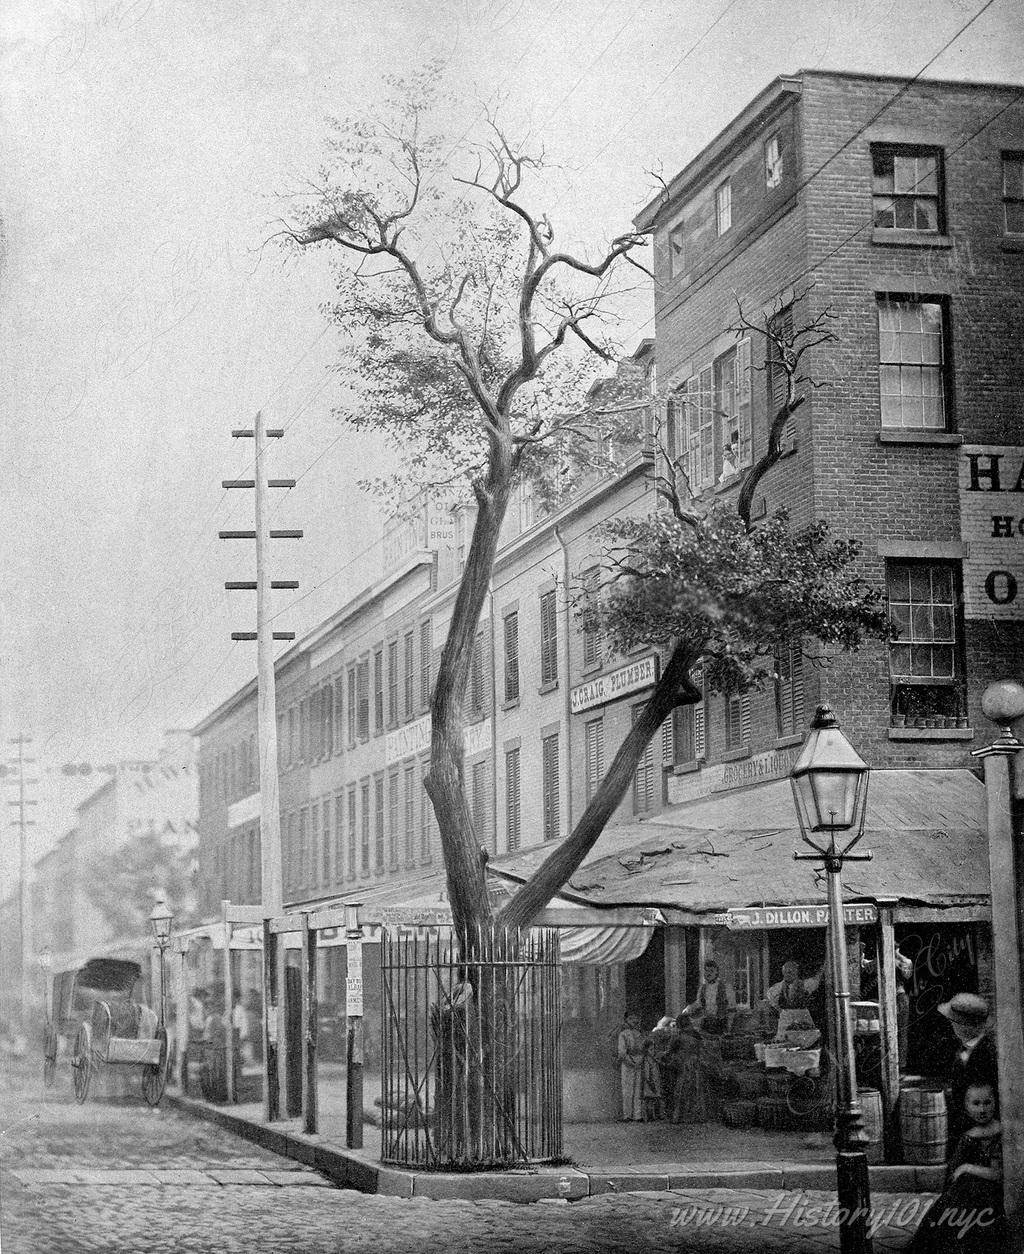 Discover the story of the Stuyvesant pear tree, a symbol of NYC's transformation from Dutch colony to modern city, standing from 1647 to 1867